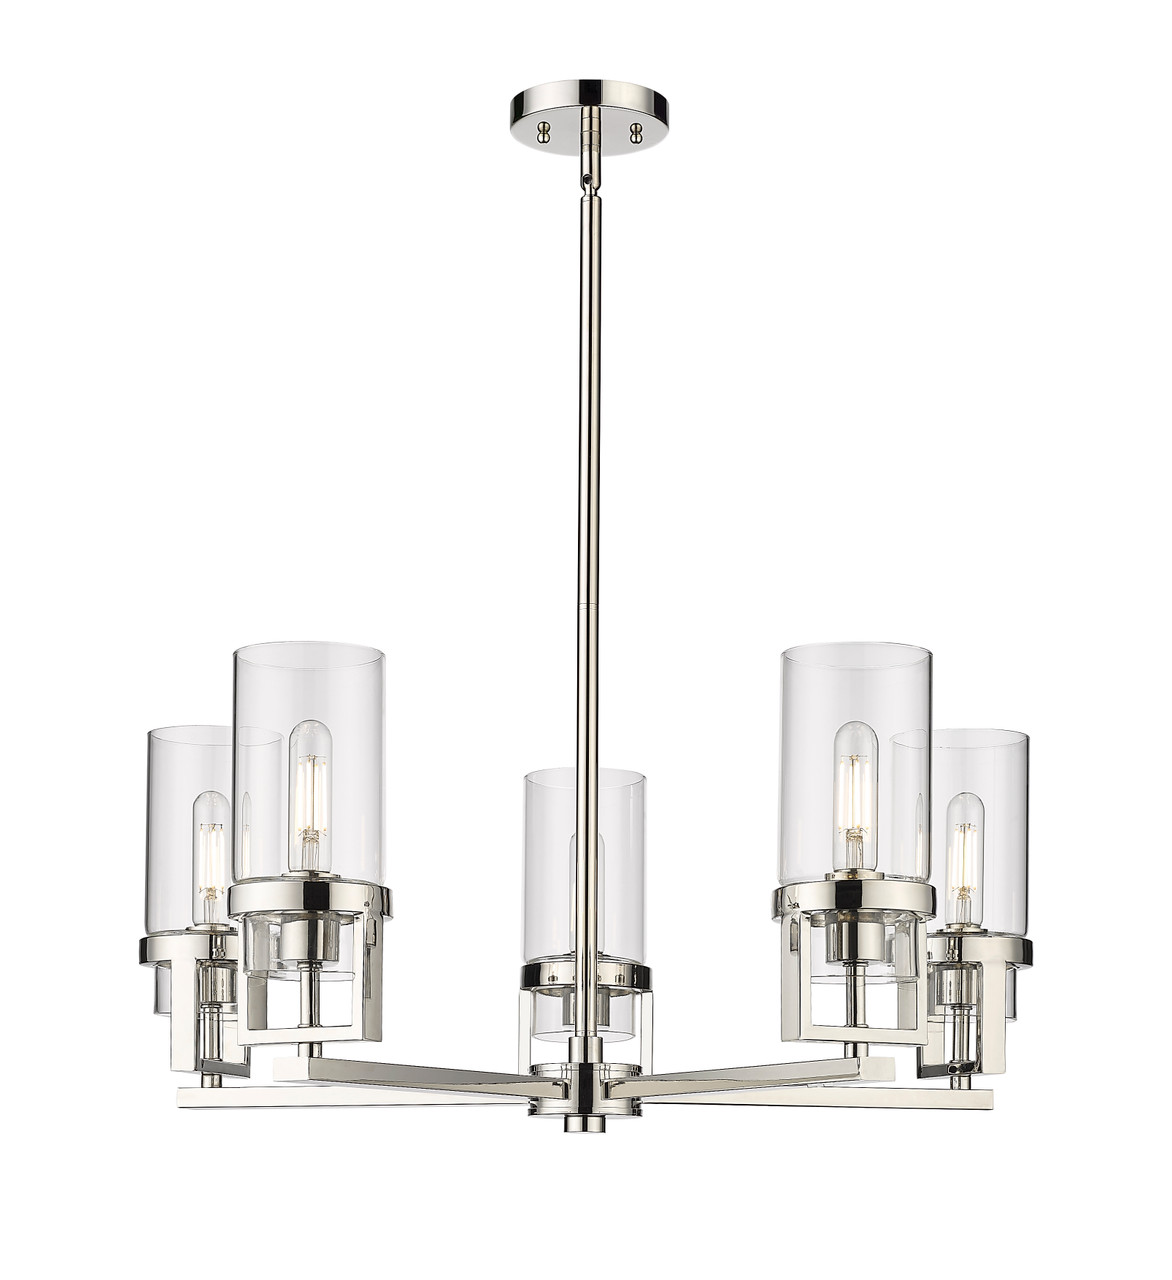 INNOVATIONS 426-5CR-PN-G426-8CL Utopia 5 24 inch Chandelier Polished Nickel